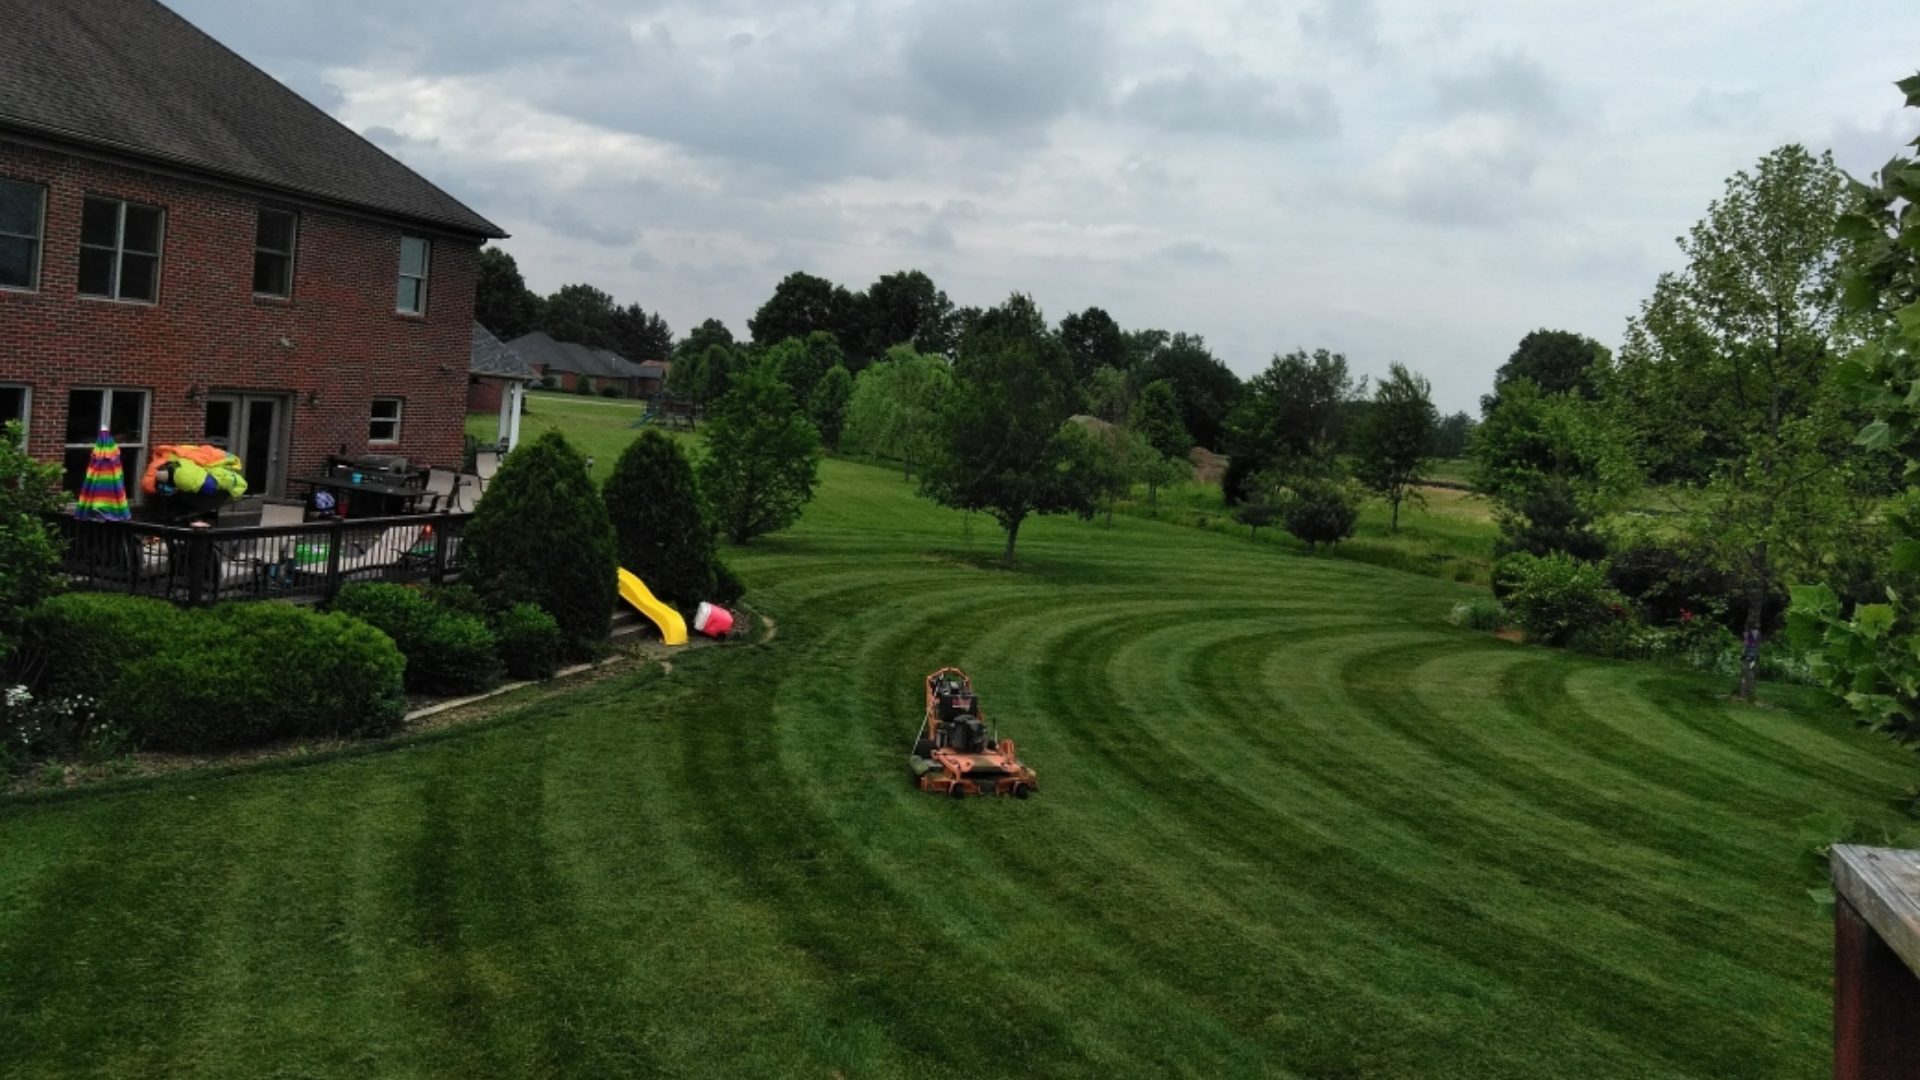 Higher view of freshly mowed lawn with half circle pattern lines in Prospect, KY.